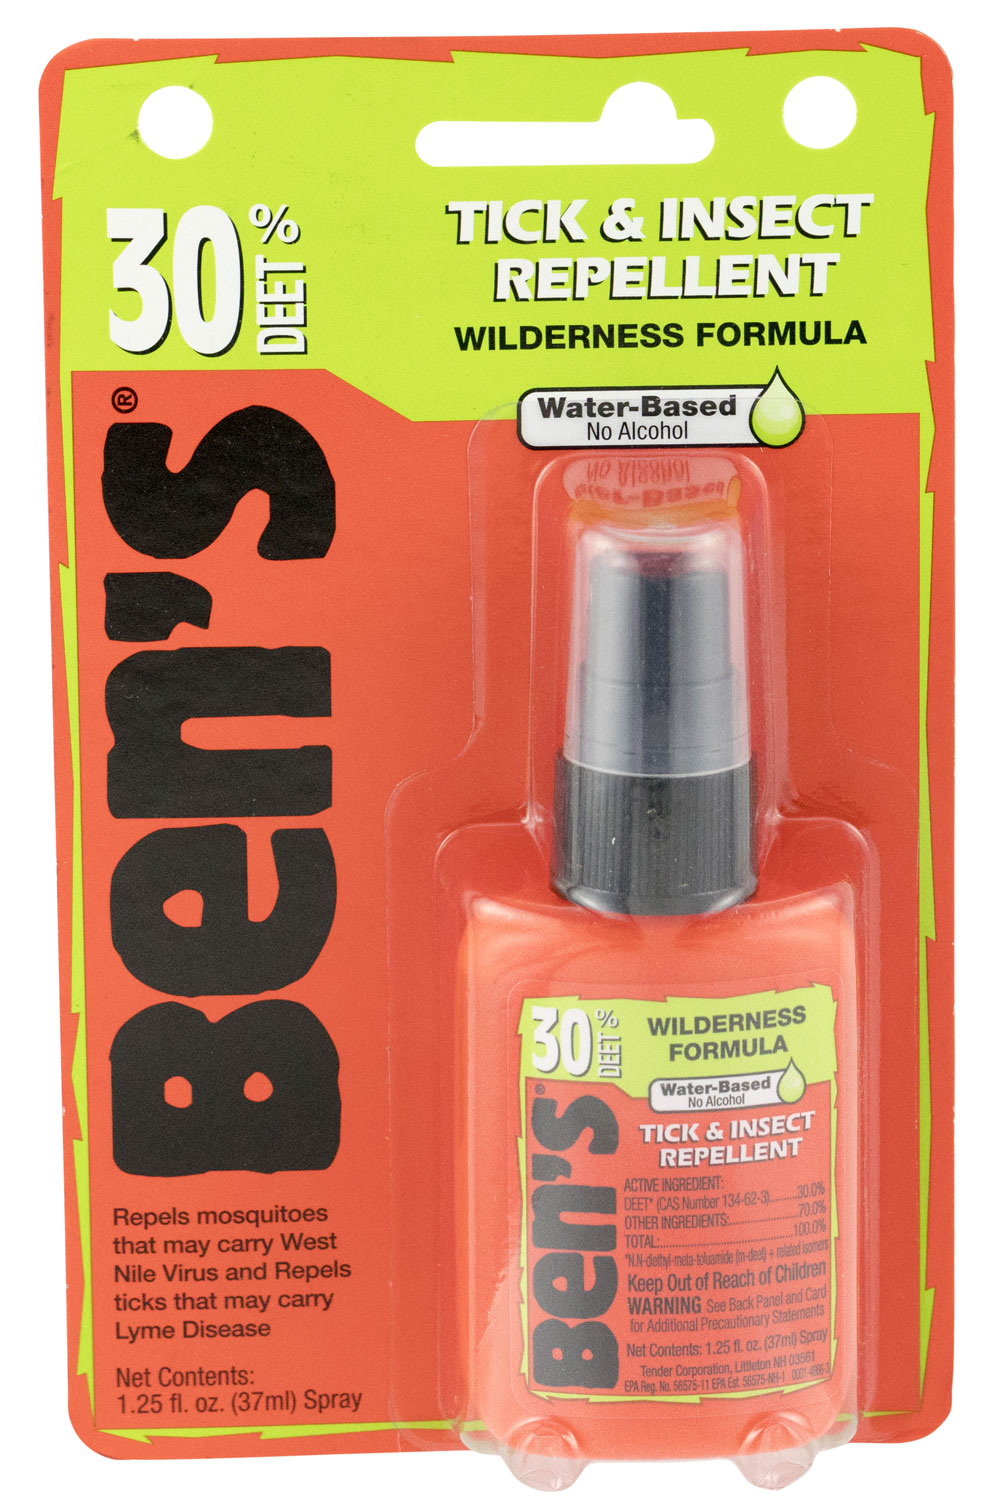 Bens 00067190 30  Odorless Scent Spray Repels Ticks & Biting Insects 1.25 oz Effective Up to 8 hrs